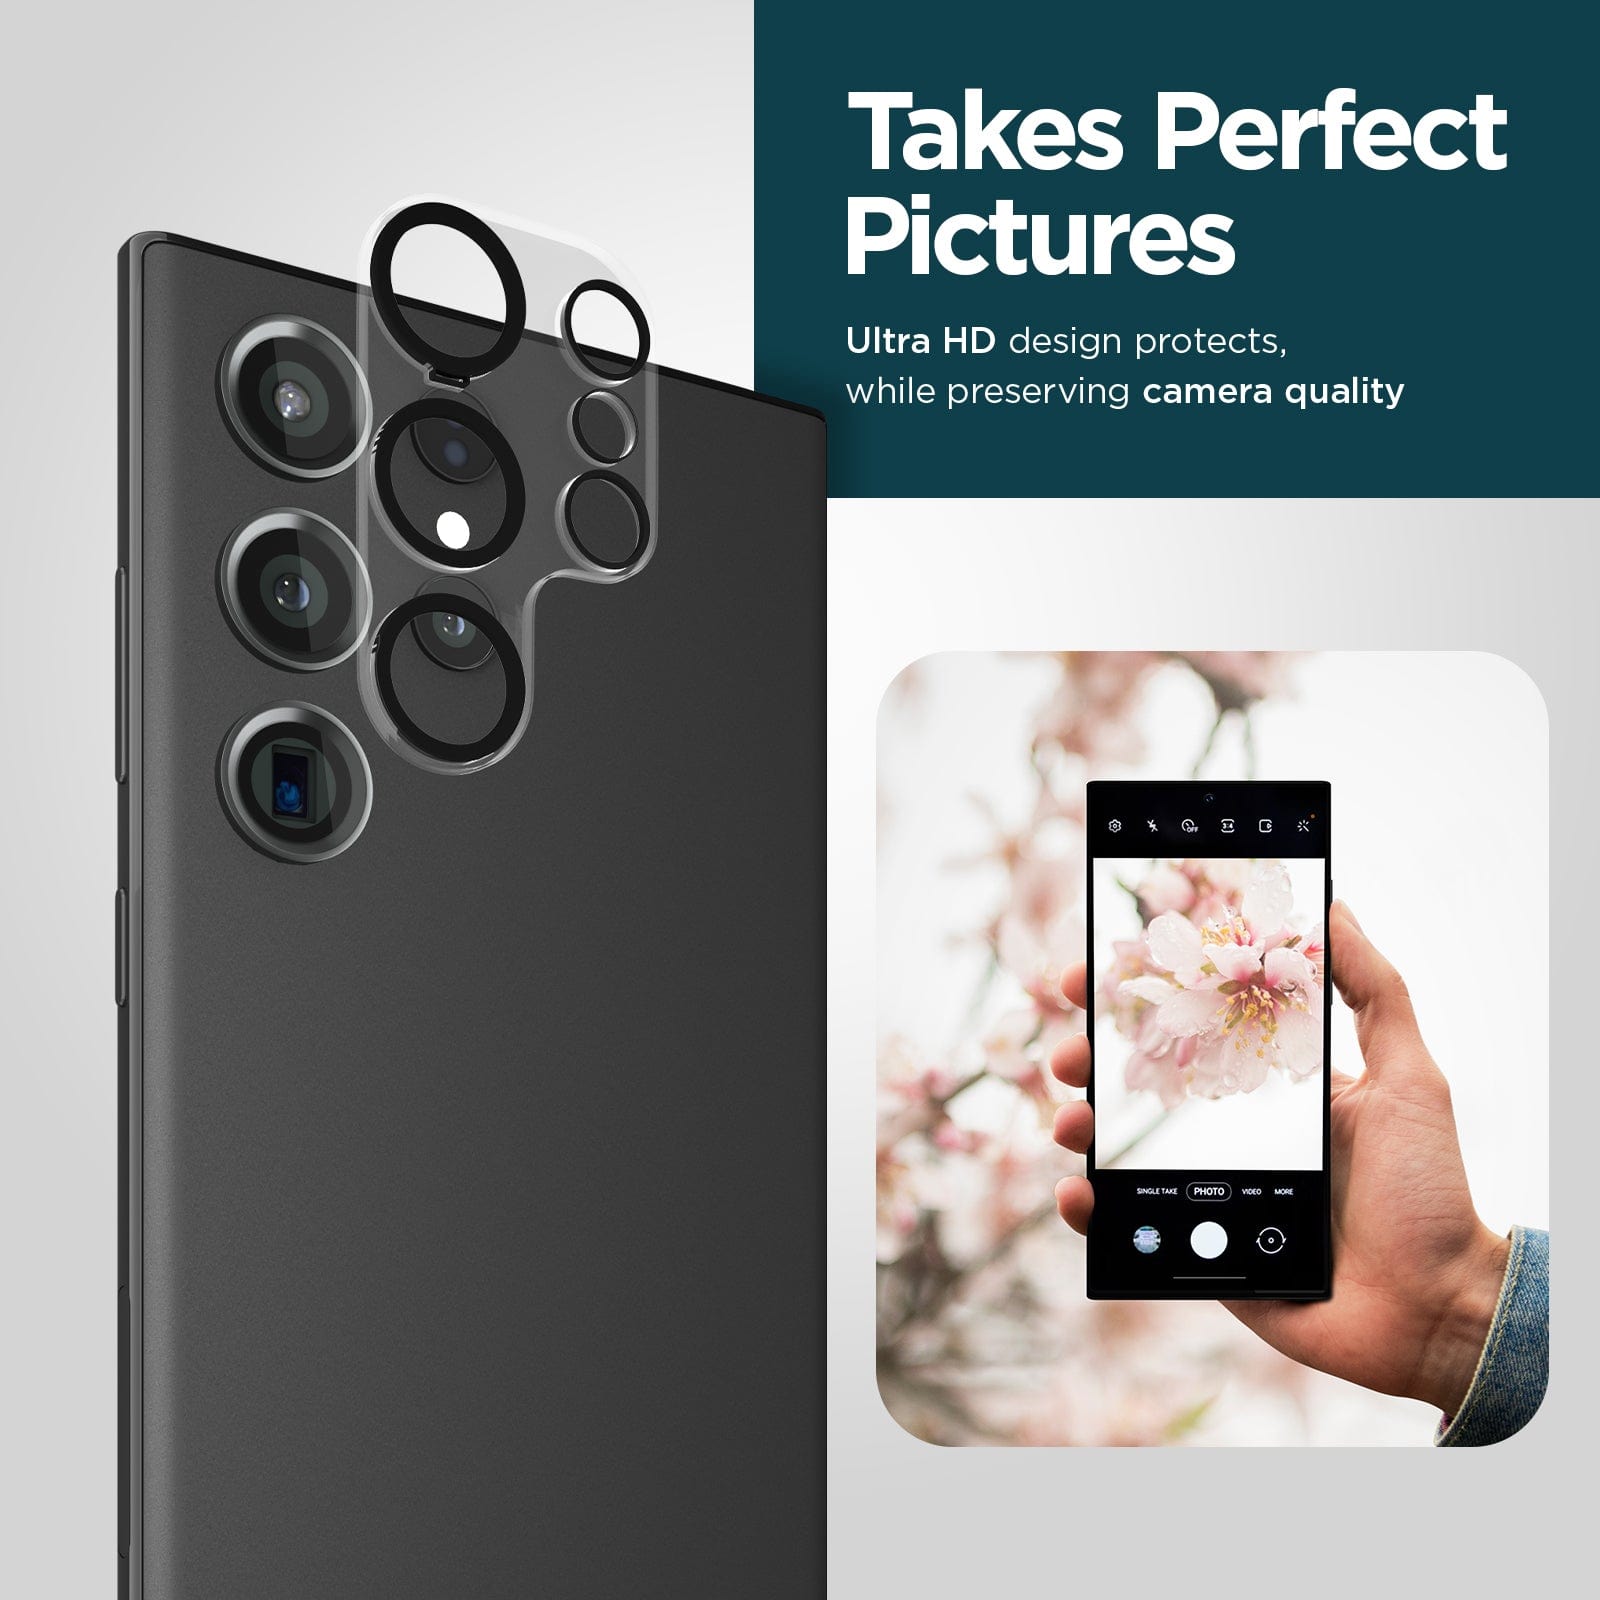 TAKES PERFECT PICTURES. ULTRA HD DESIGN PROTECTS, WHILE PRESERVING CAMERA QUALITY.